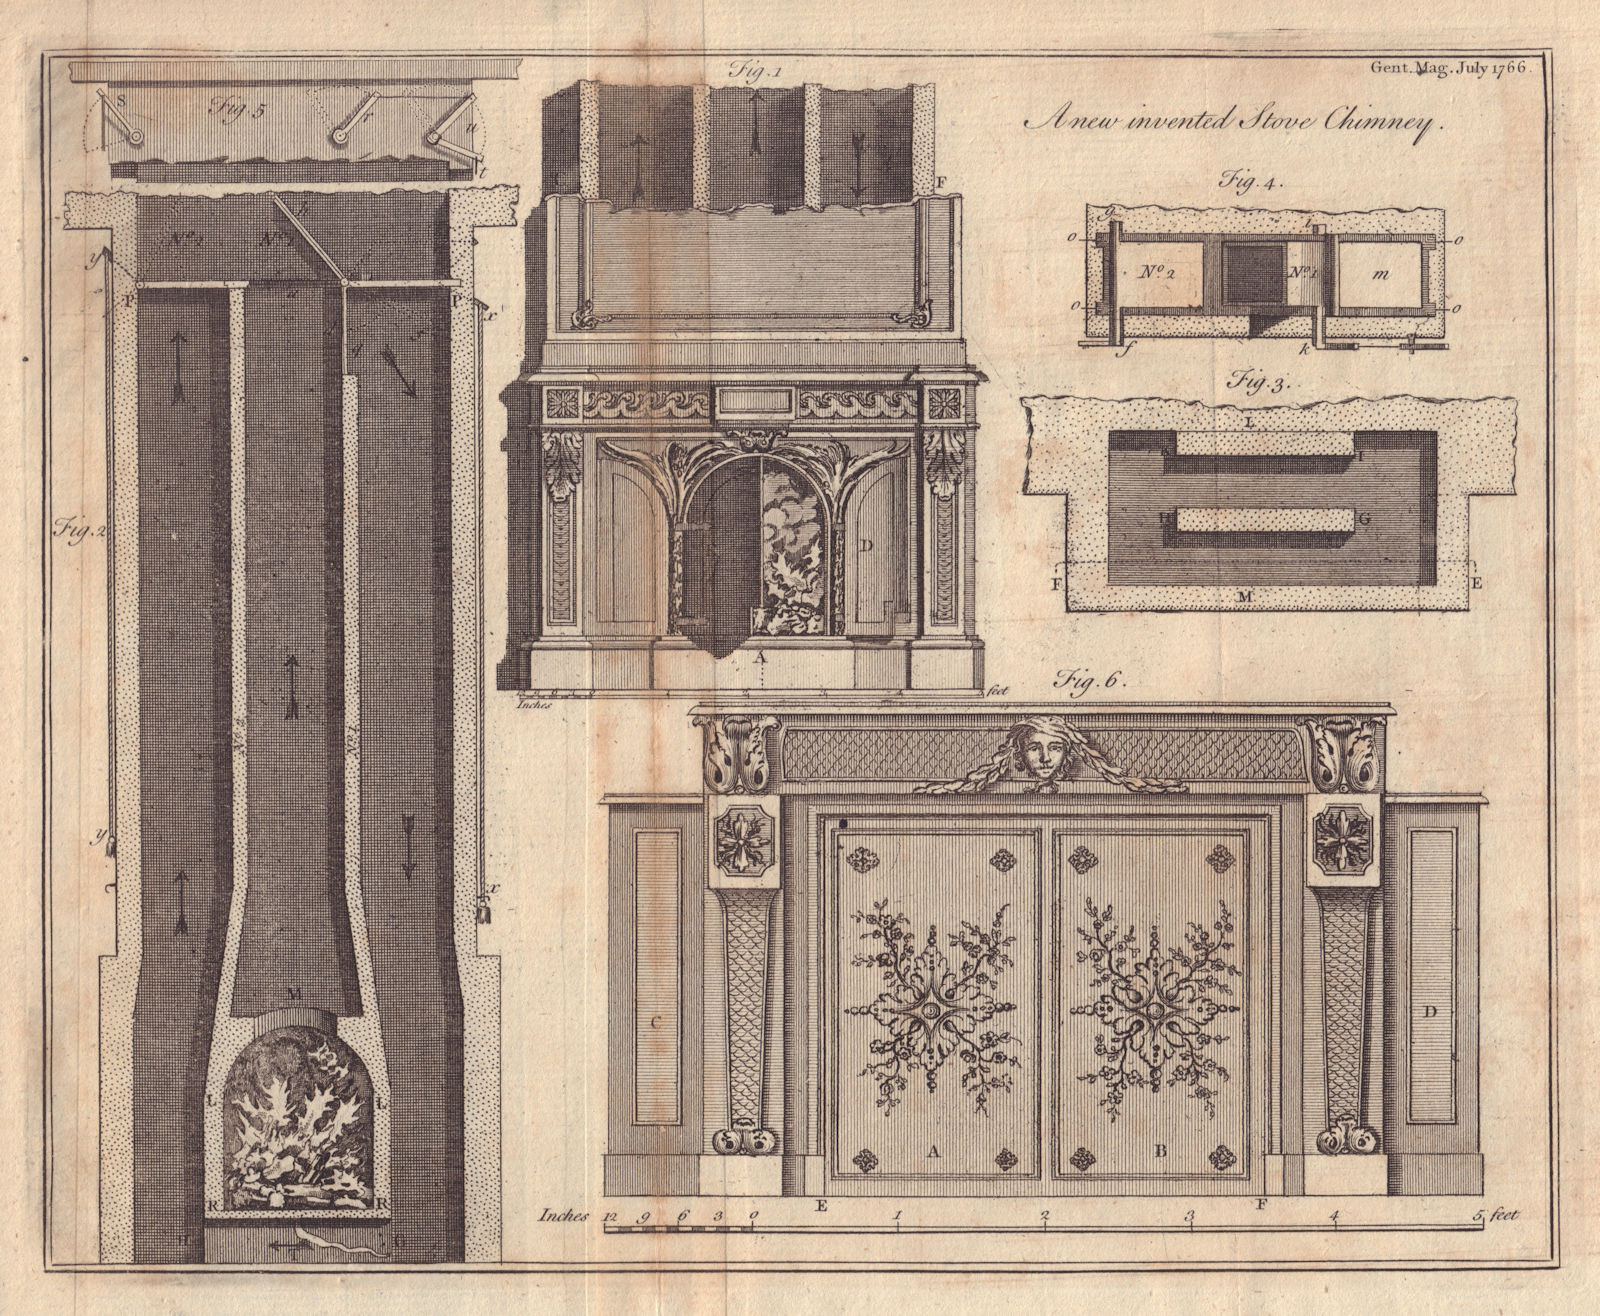 Associate Product A new invented Stove Chimney by Montalembert. Decorative. GENTS MAG 1766 print